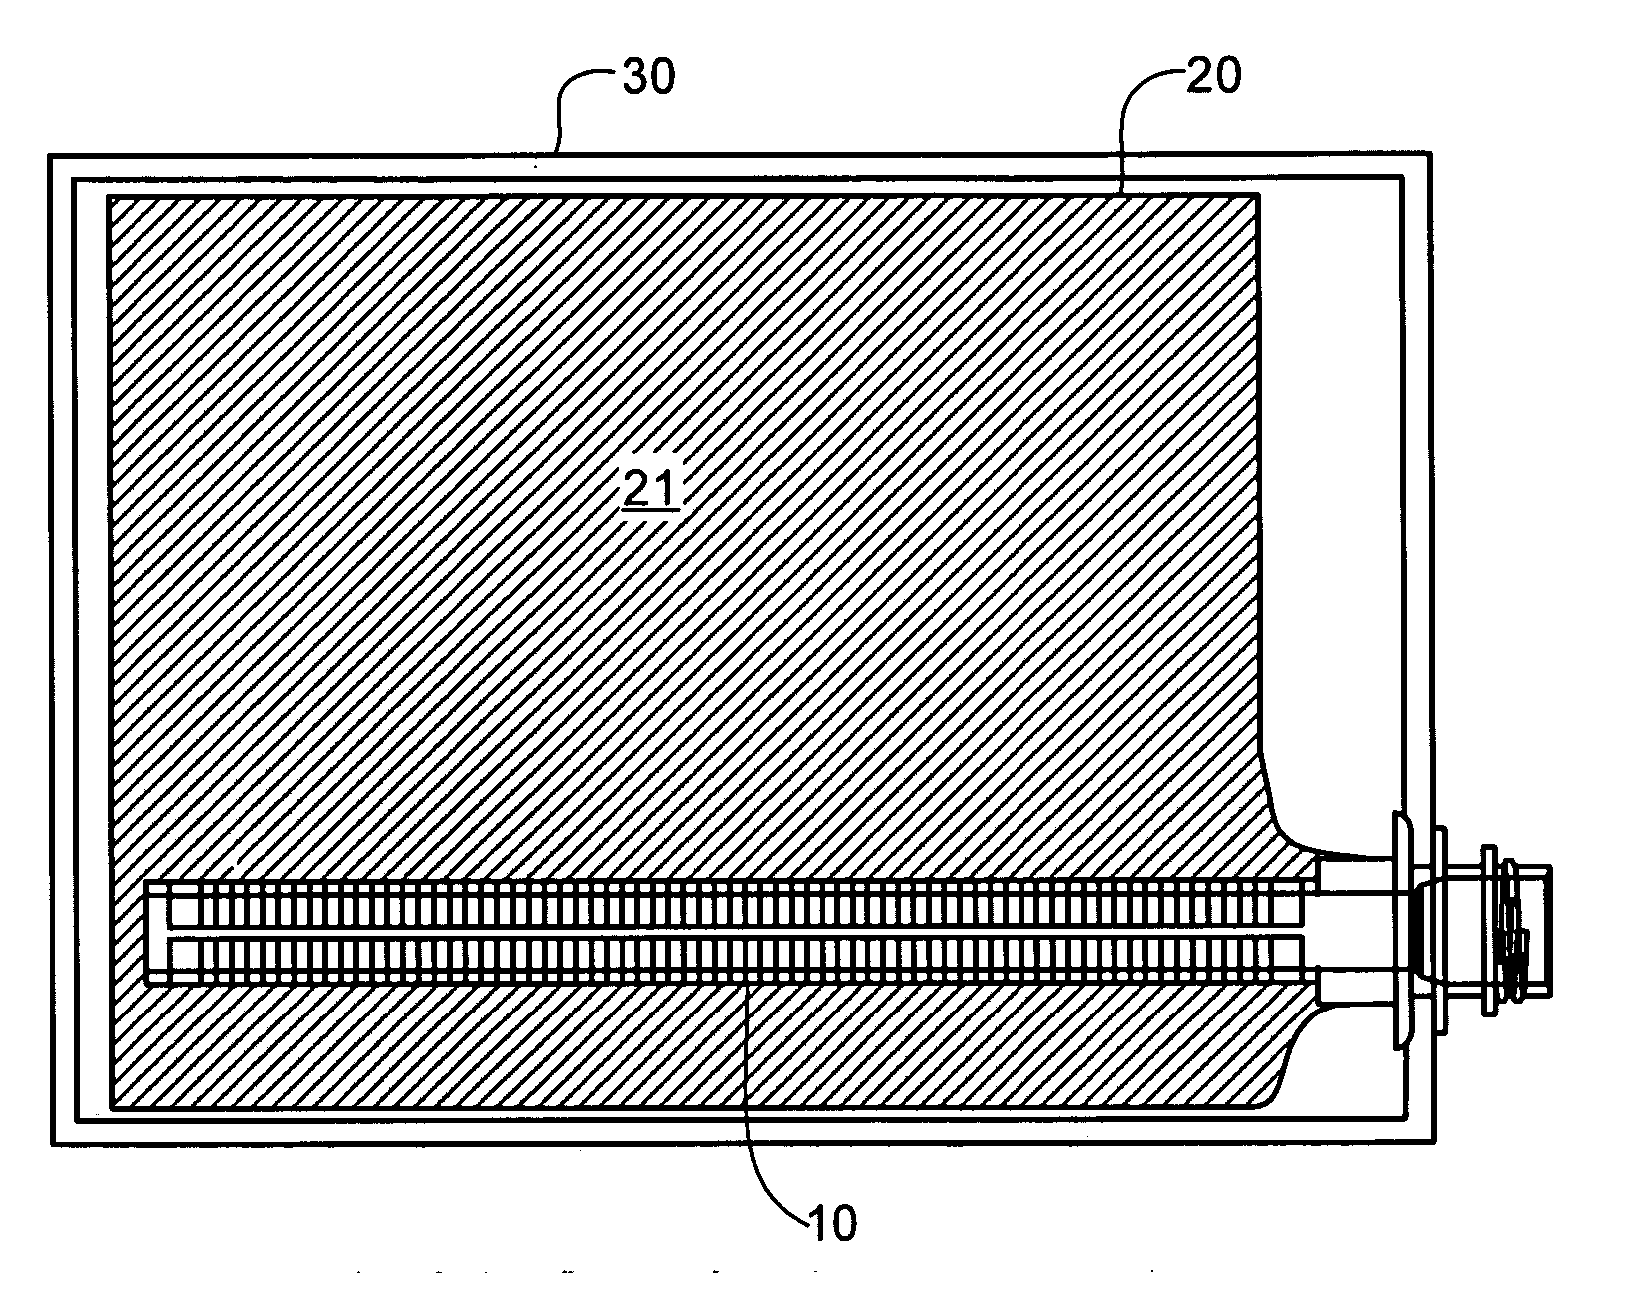 Depletion device for bag in box containing viscous liquid